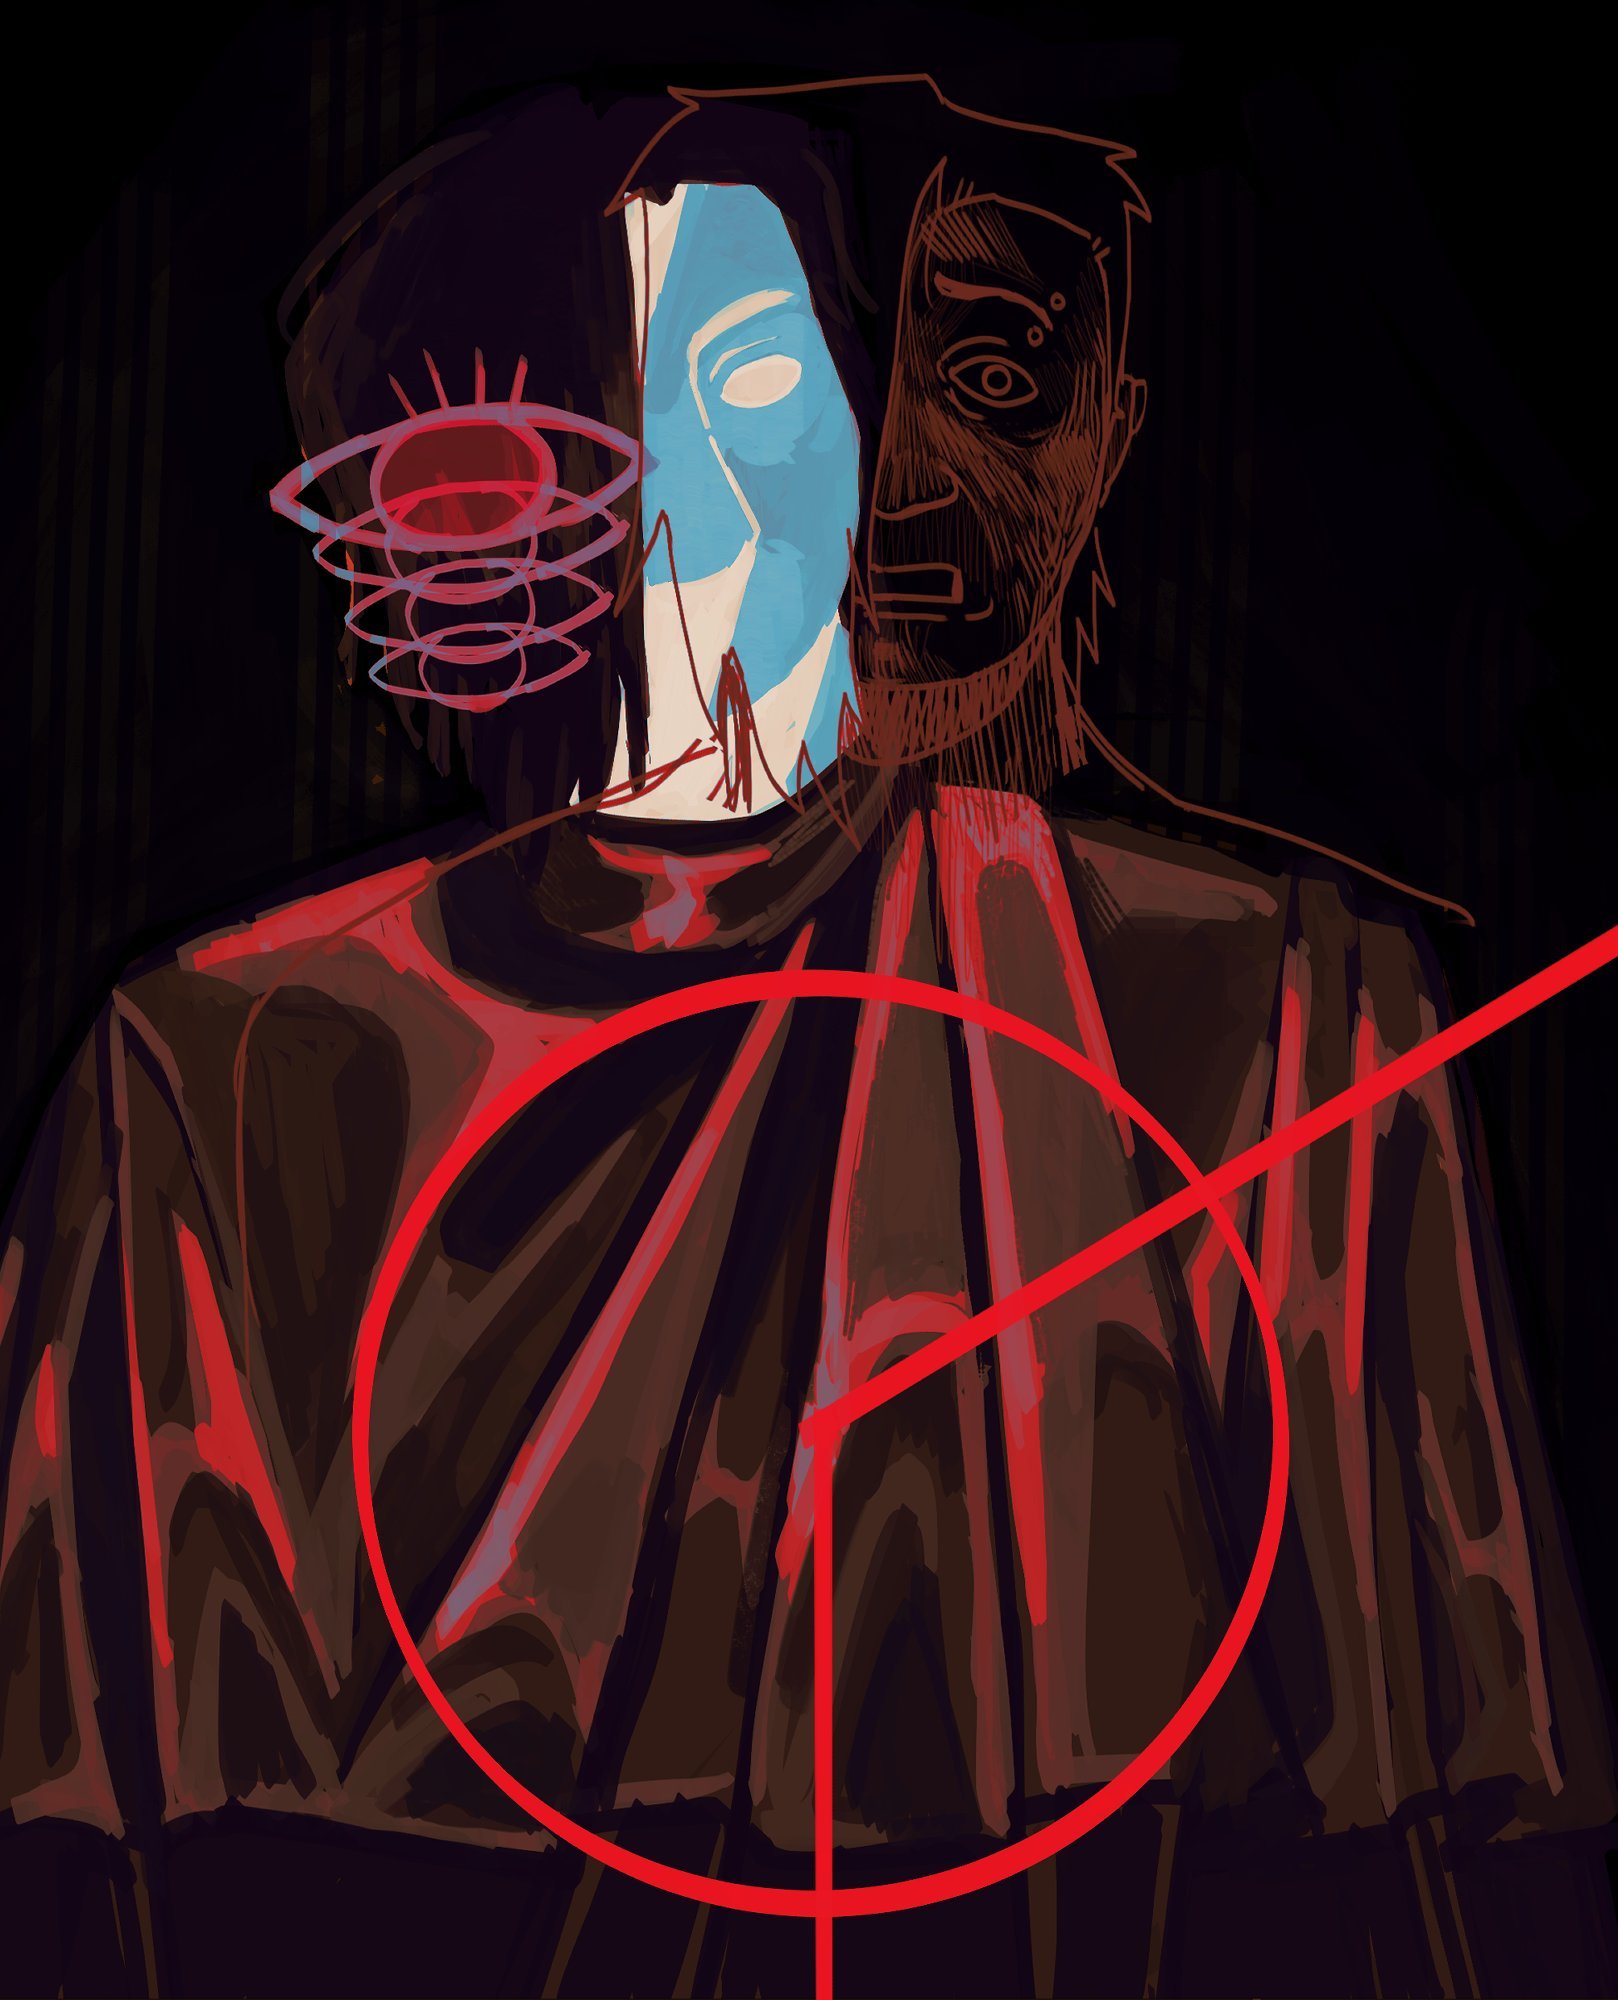 A digital painting of a man with long, dark hair and empty eyes overlayed by a line-drawing of the same man looking frightened. Other elements include overlapping eye-shapes and a circle with two lines through it.